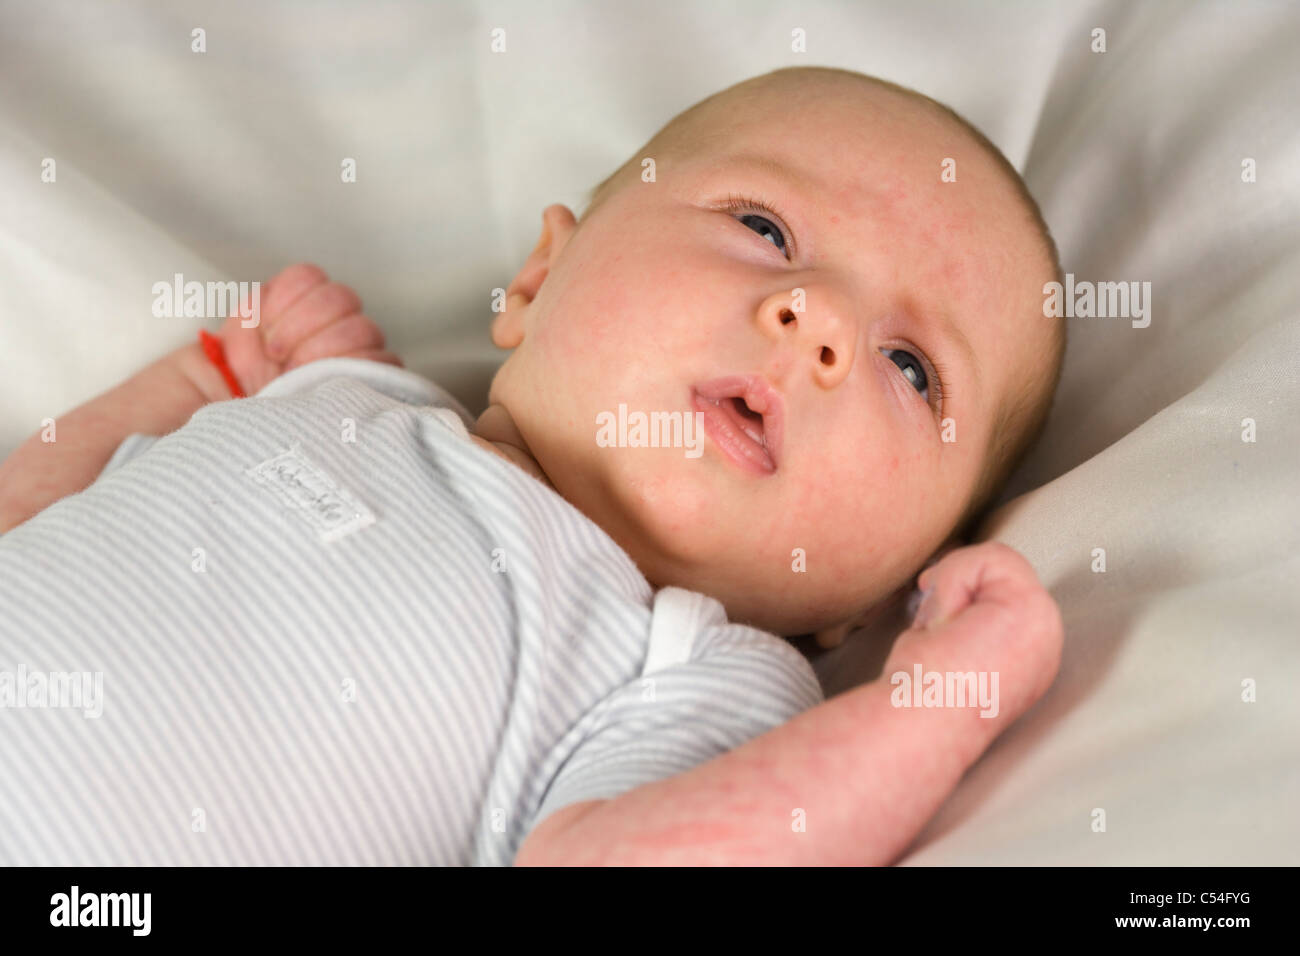 half month old baby girl Stock Photo 